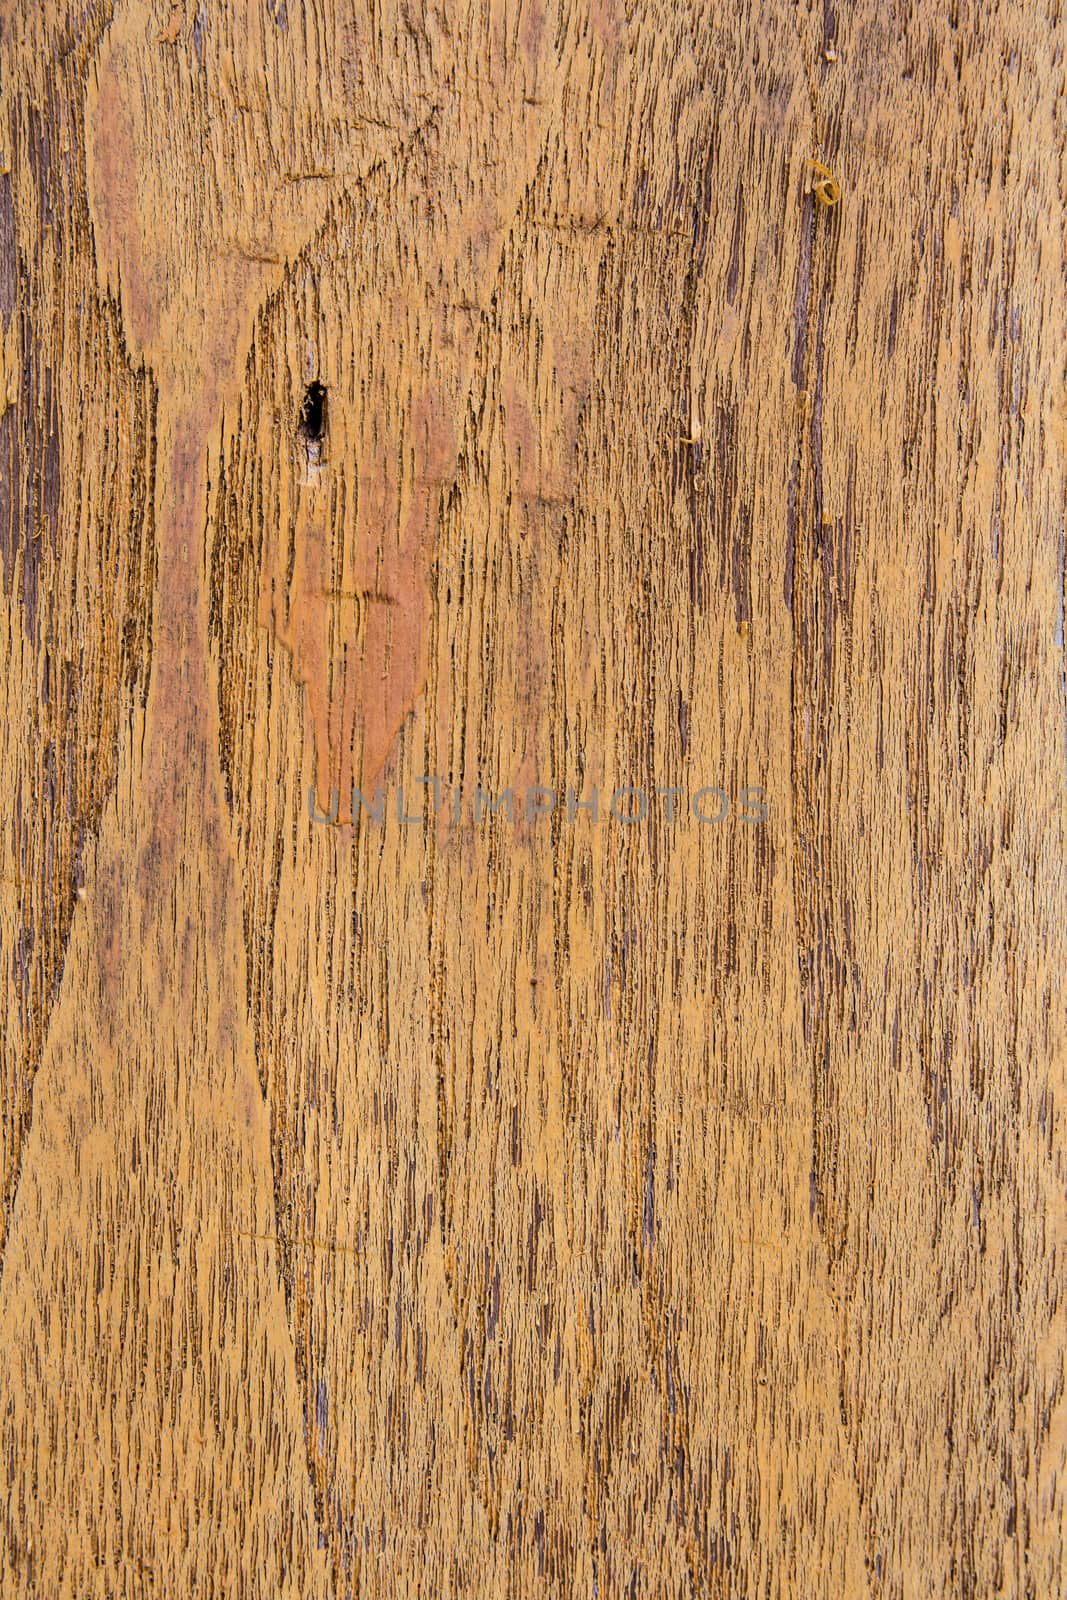 wood texture background by kasinv